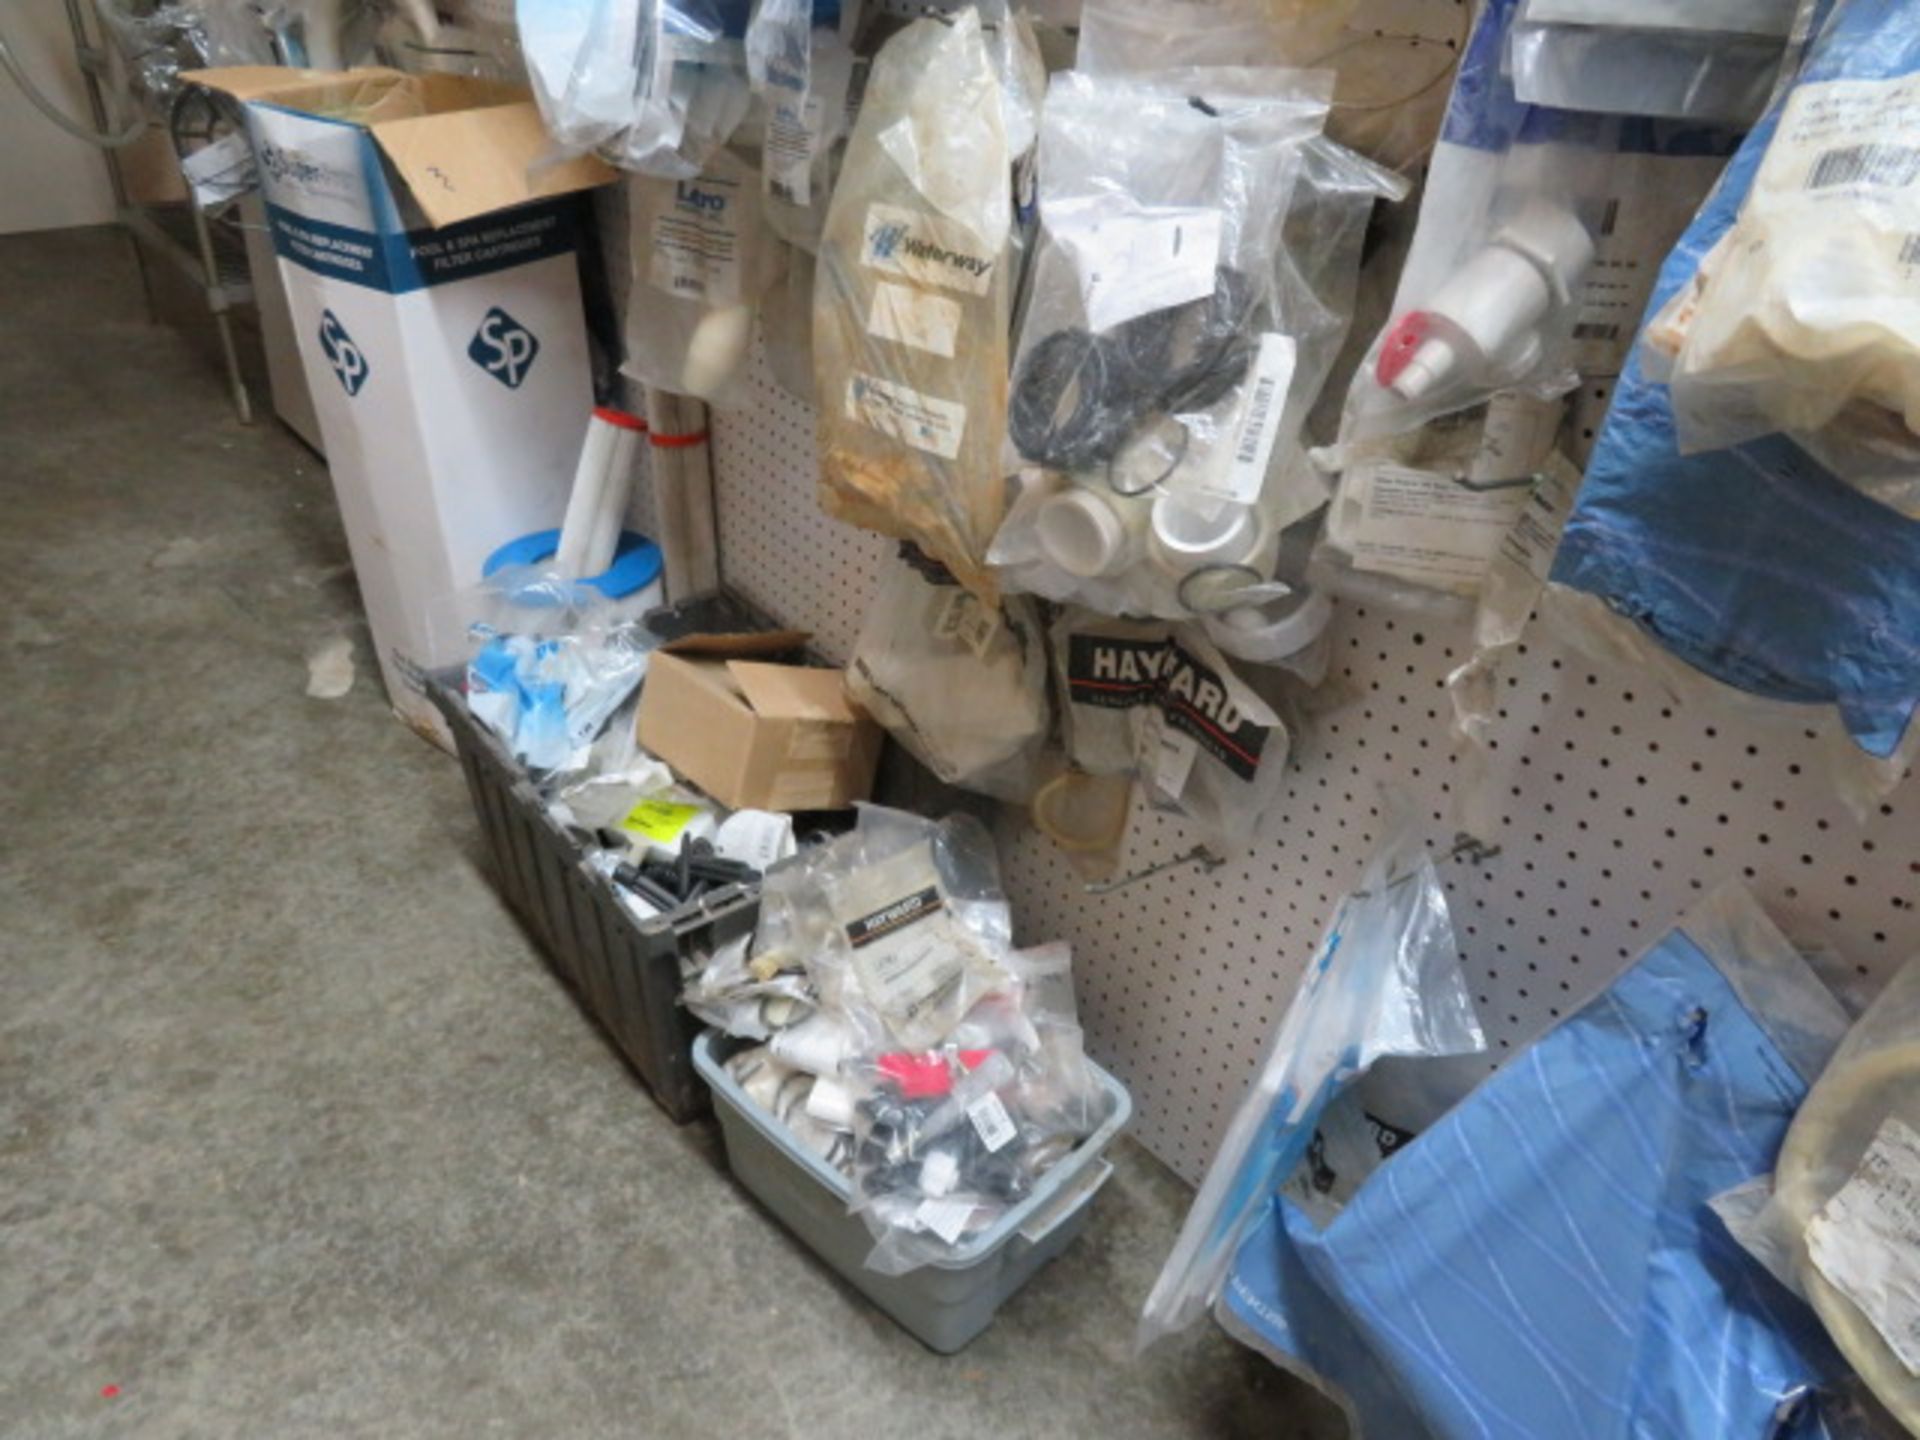 LOT CONSISTING OF: pool sweep, filter parts, pump parts, table chlorinator parts, assorted - Image 7 of 17